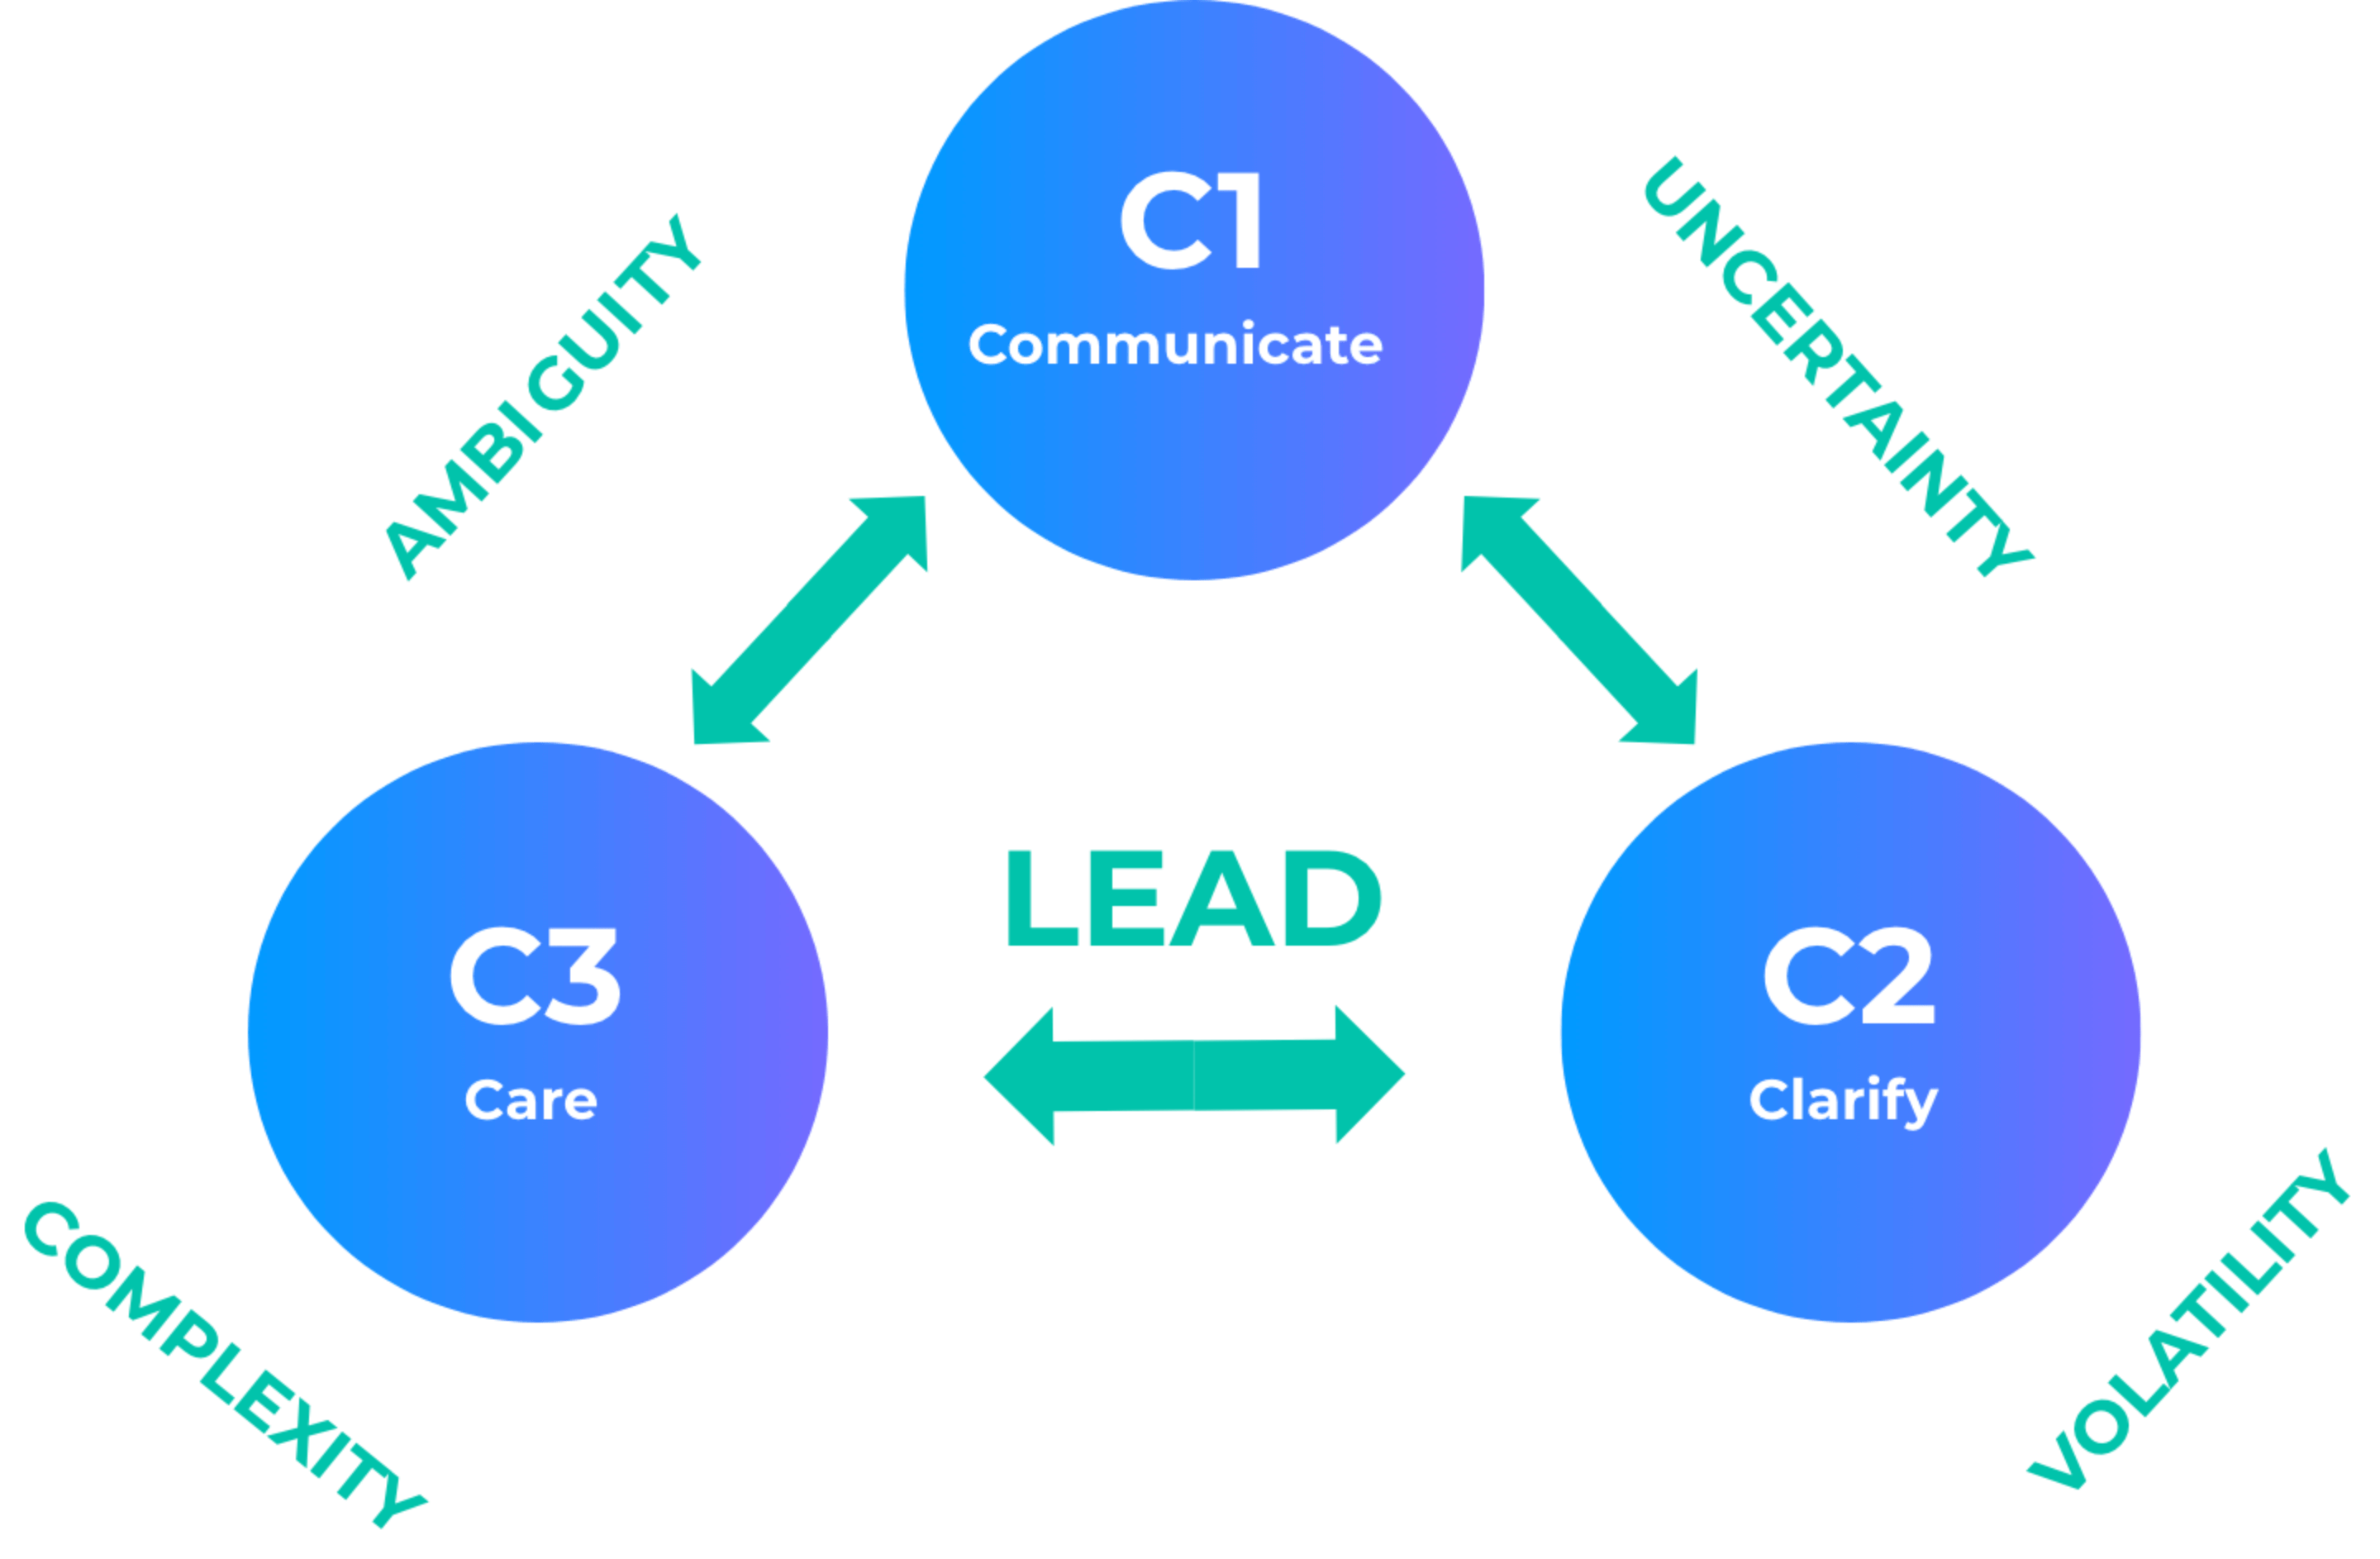 A chart model, which explains the 3C Leadership Model. This model is composed by 3 C's (Communicate, Clarify, Care), and show how the relation between these could turn a person into a great leader.